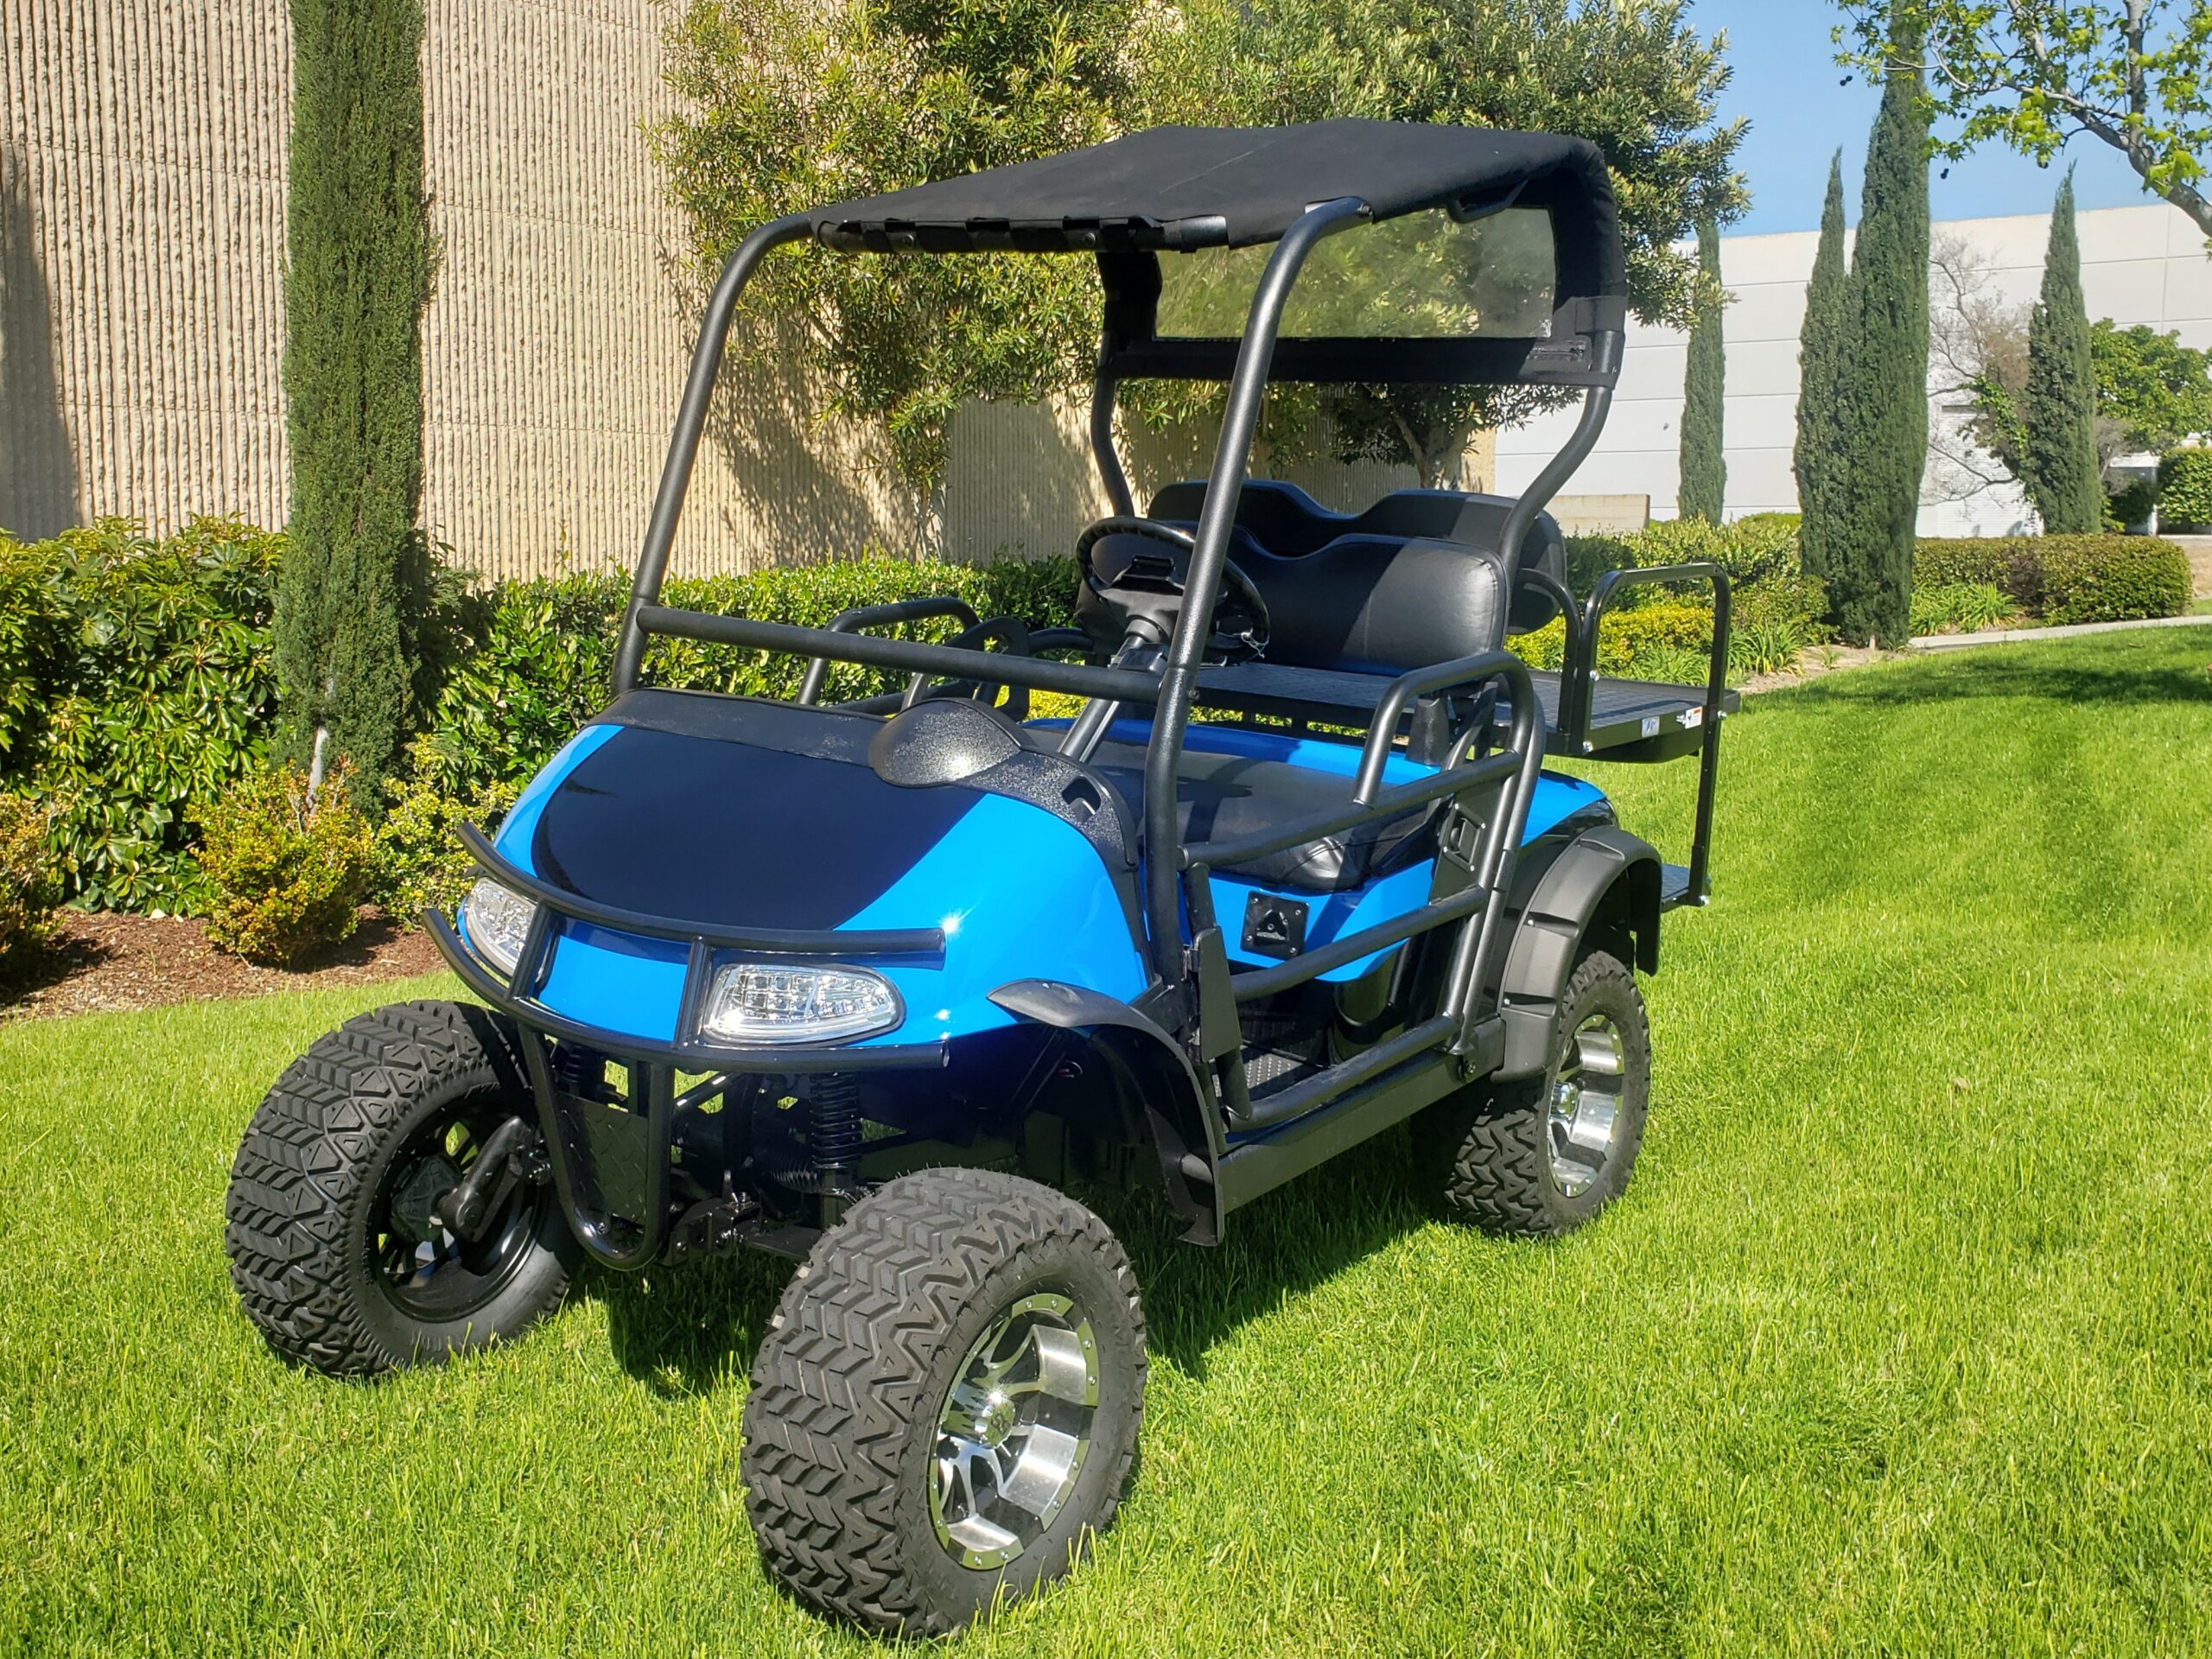 Tricked Out Ezgo RXV Lifted 4 Passenger Golf Cart- Two Tone Voodoo Blue / Black, #B54